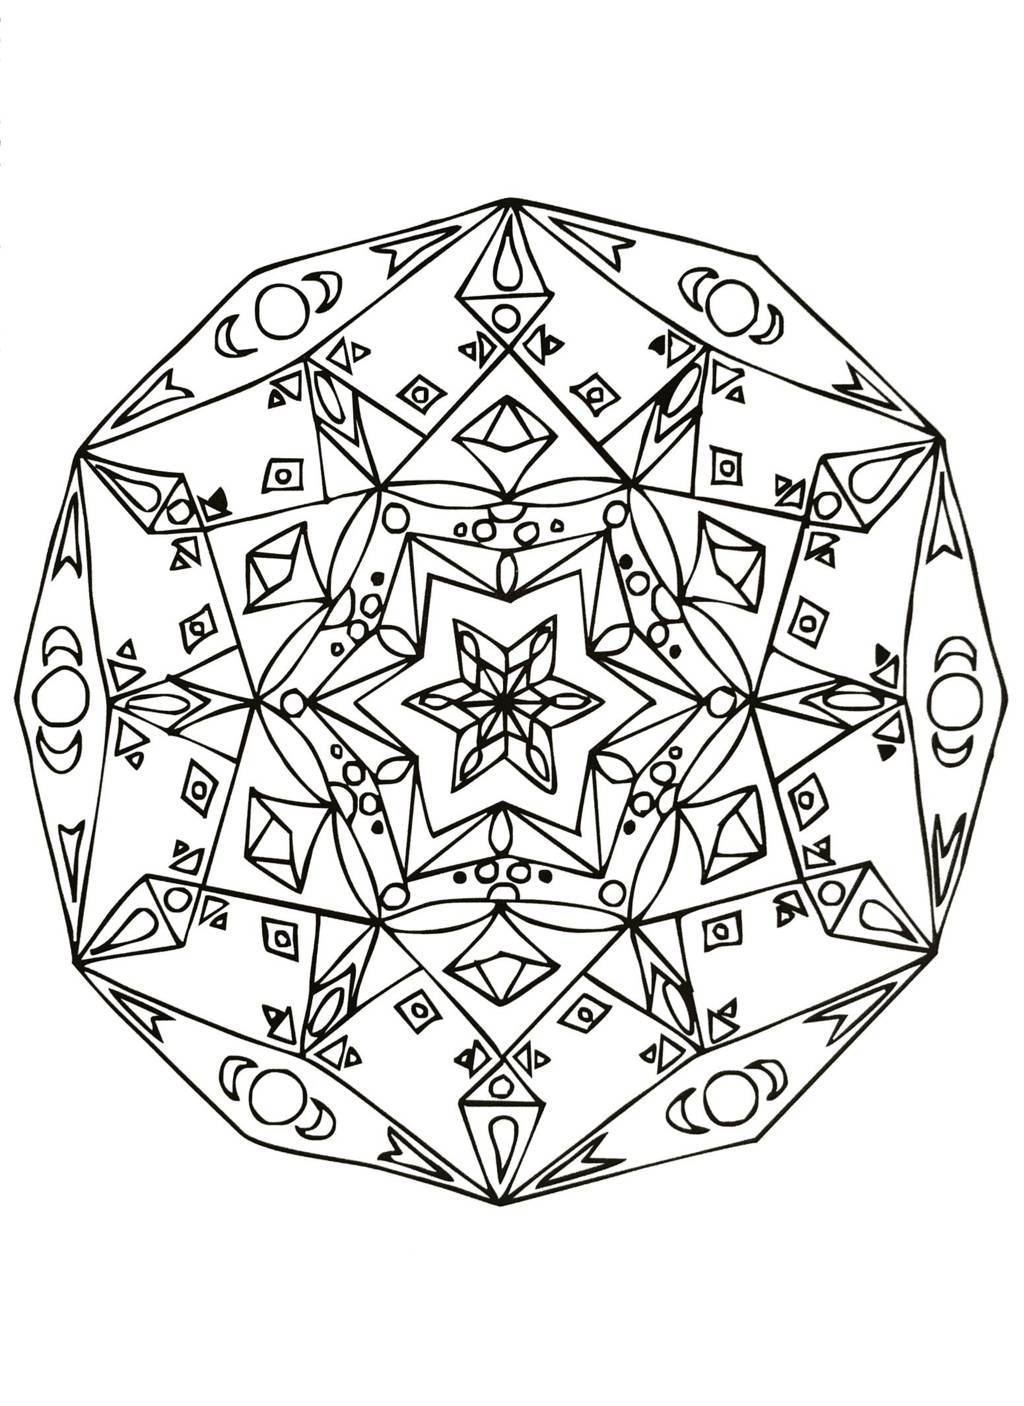 Mandalas To Download For Free 16 Coloring Page